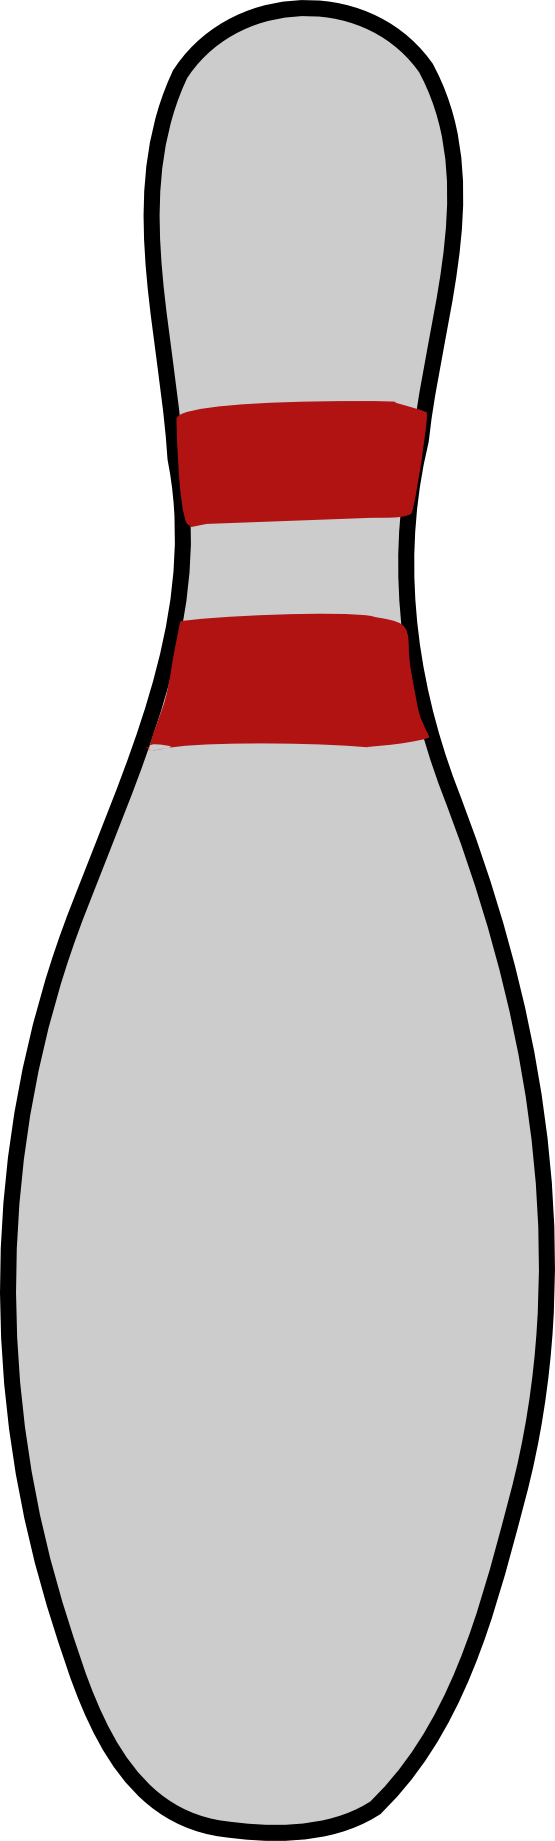 Bowling Pin Vector - ClipArt Best.